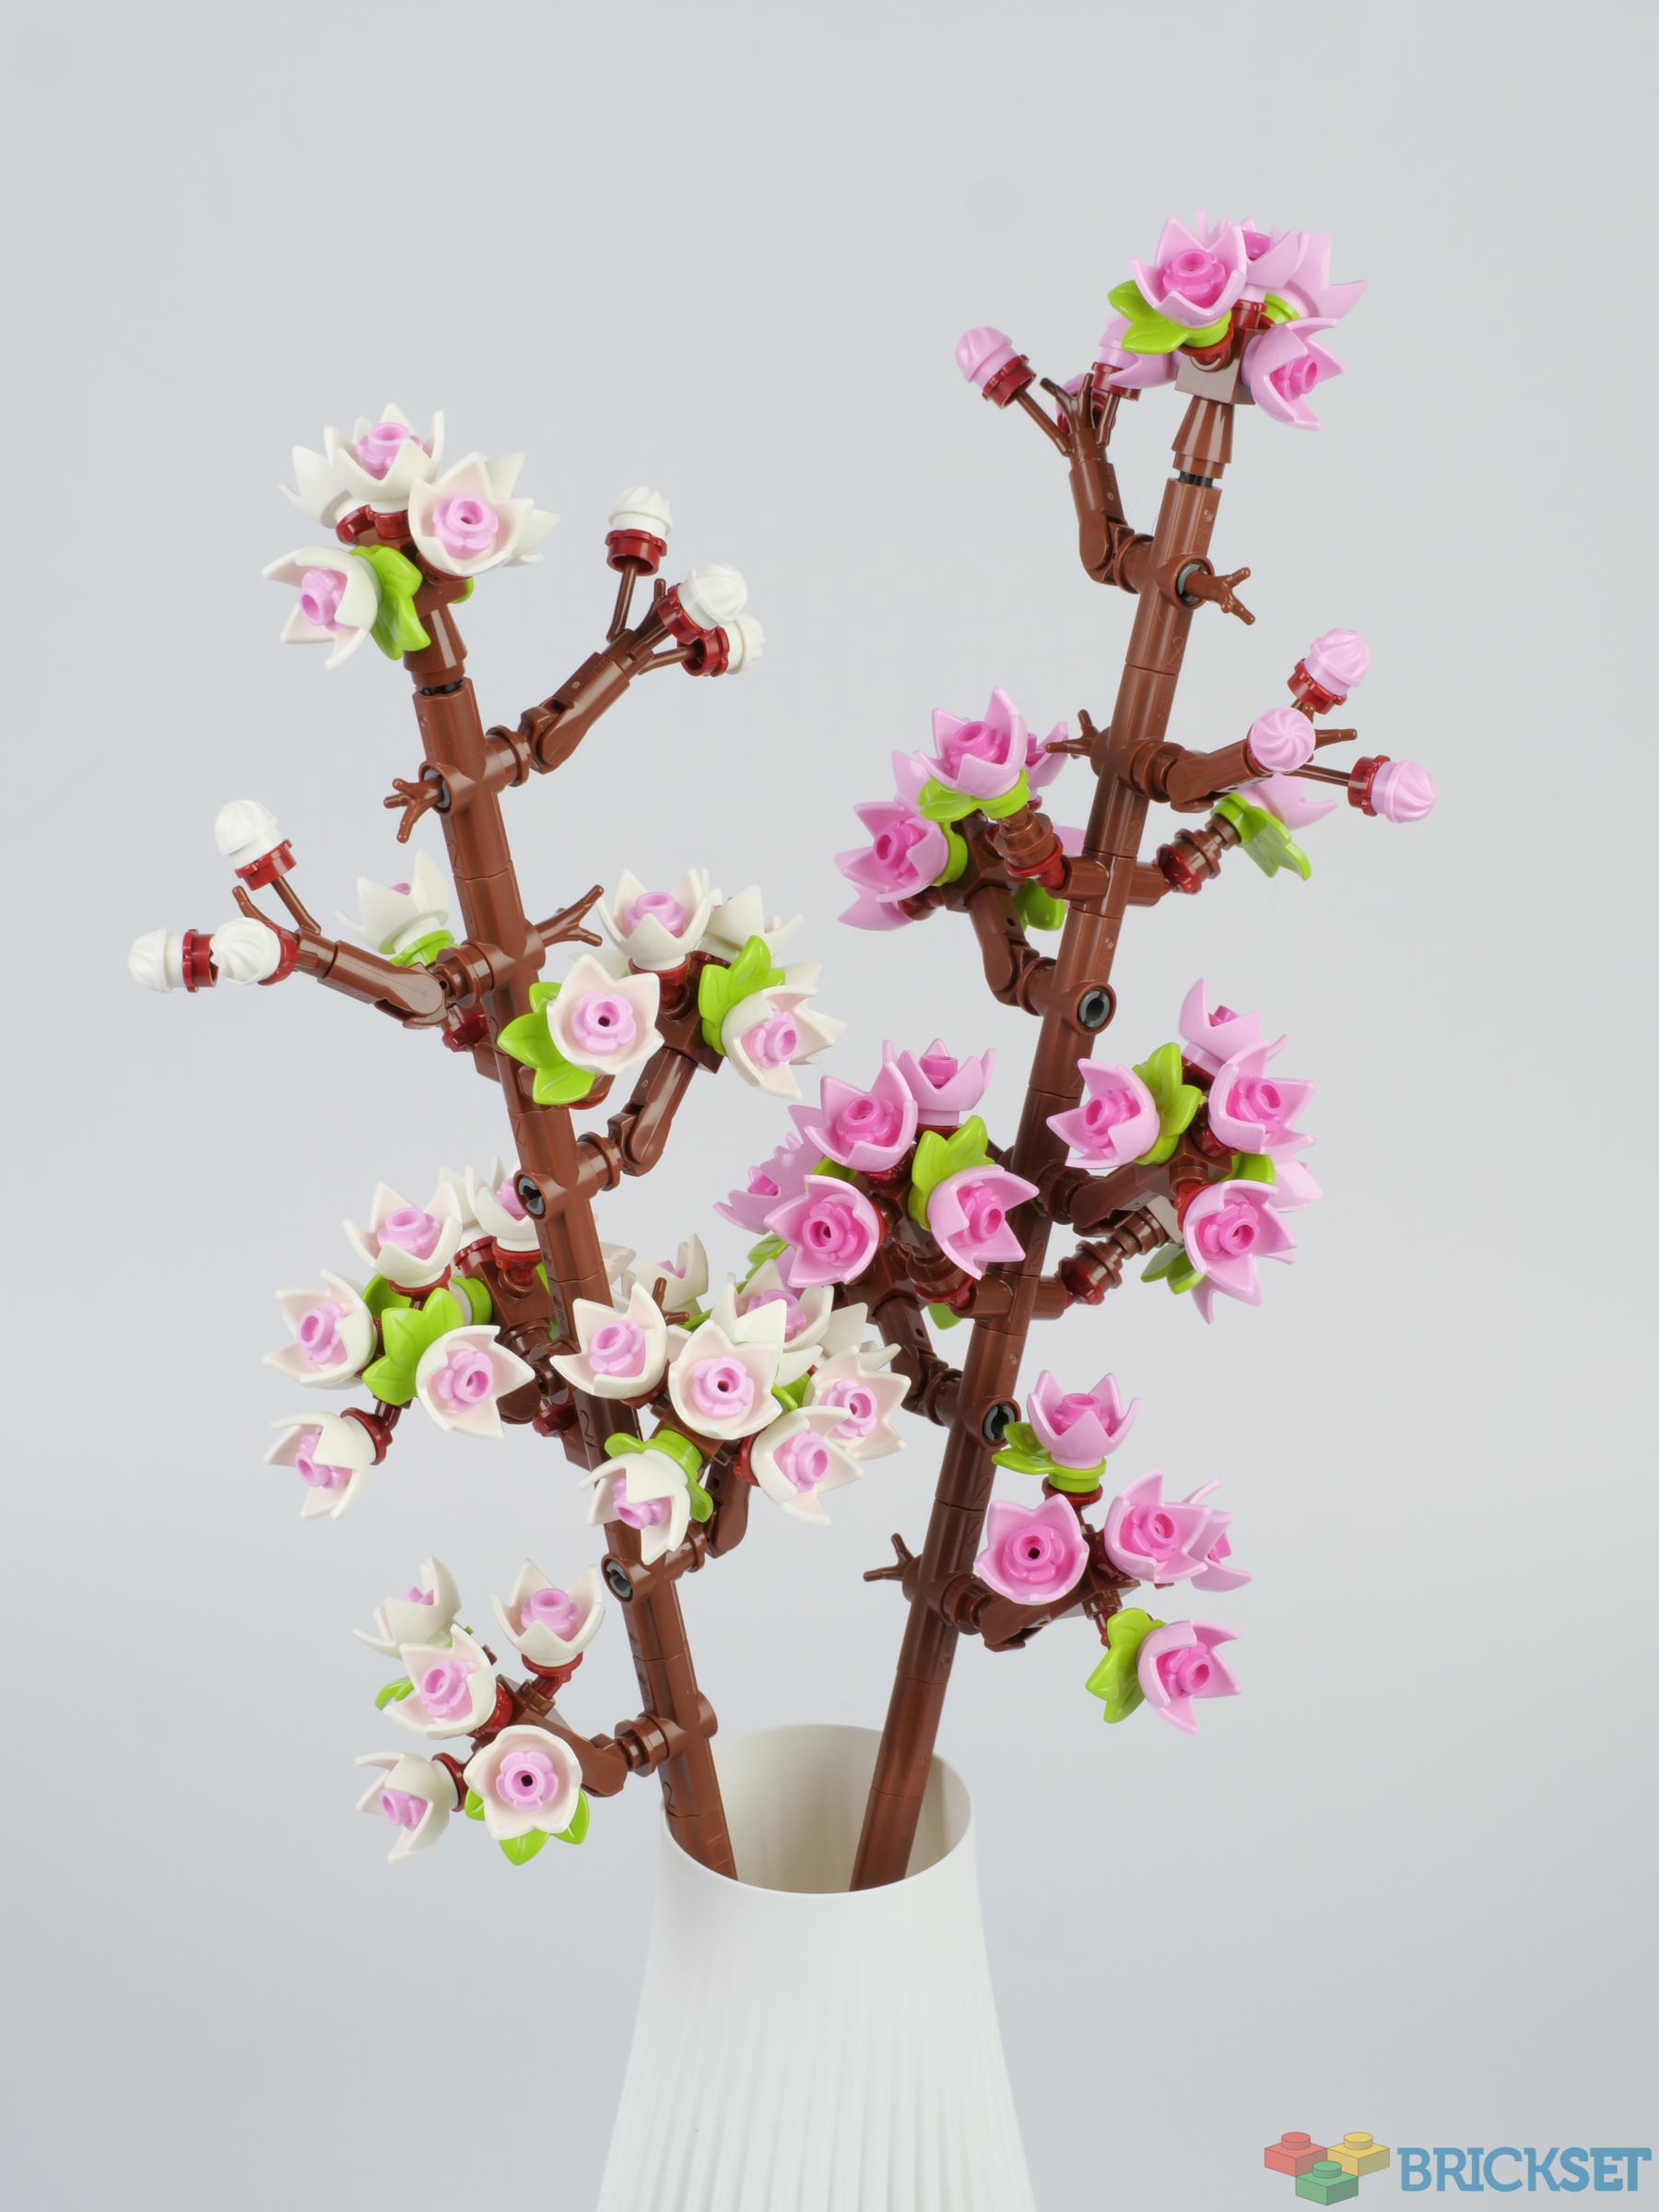 LEGO 40725 Cherry Blossoms - Entertainment Earth